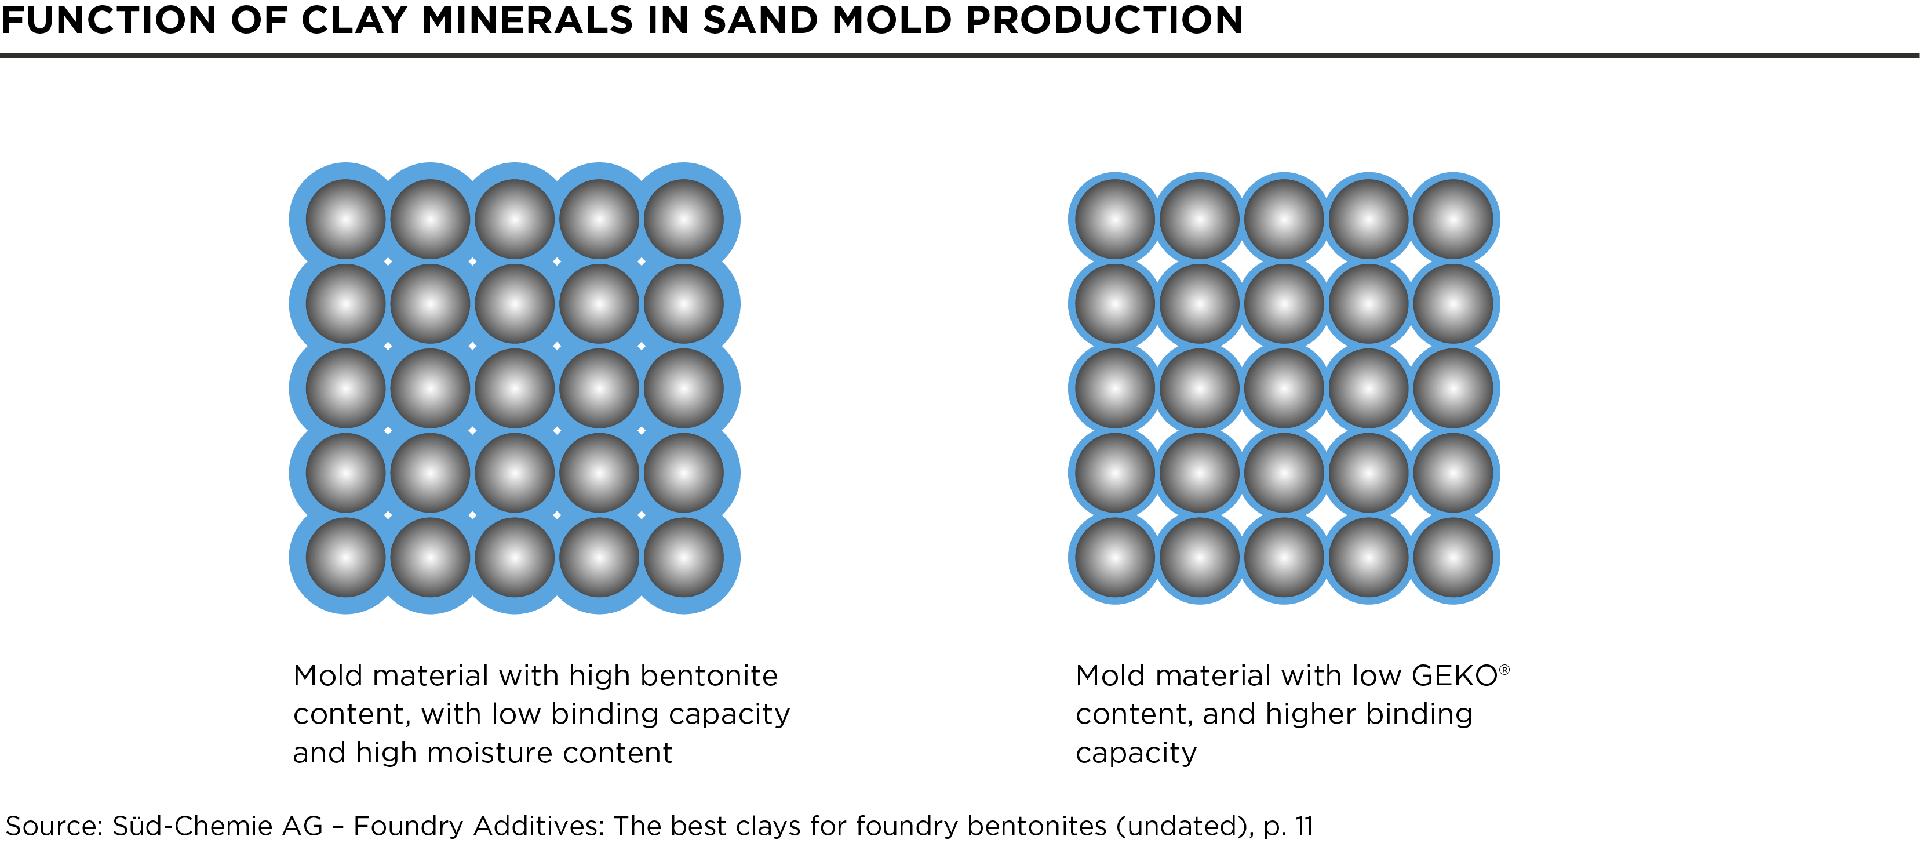 HighRes_CLA MOBILITY CP_Foundry_7_Function_clay_minerals_sand_casting_molds